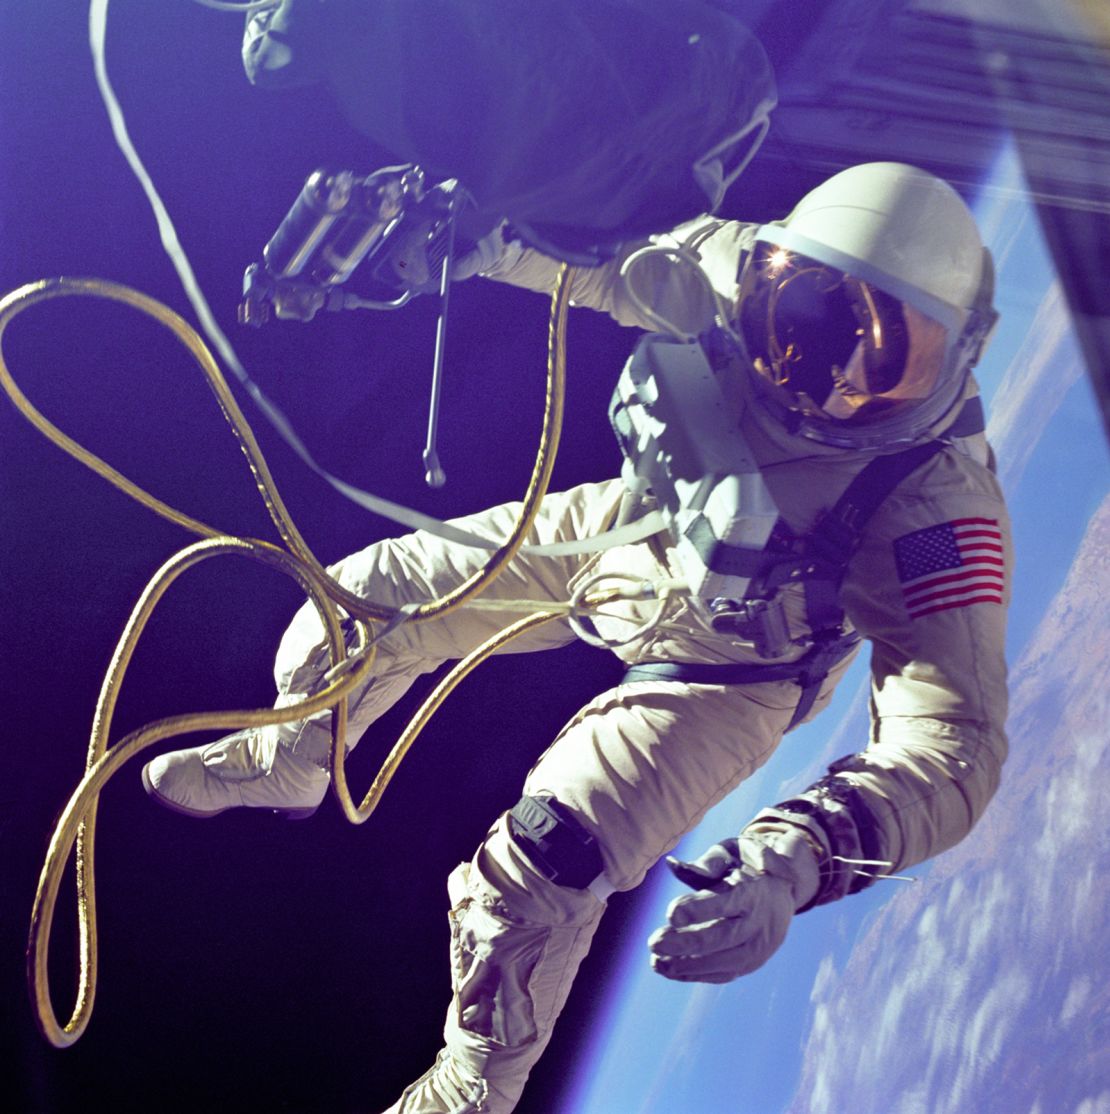 Astronaut Ed White during the first American spacewalk.